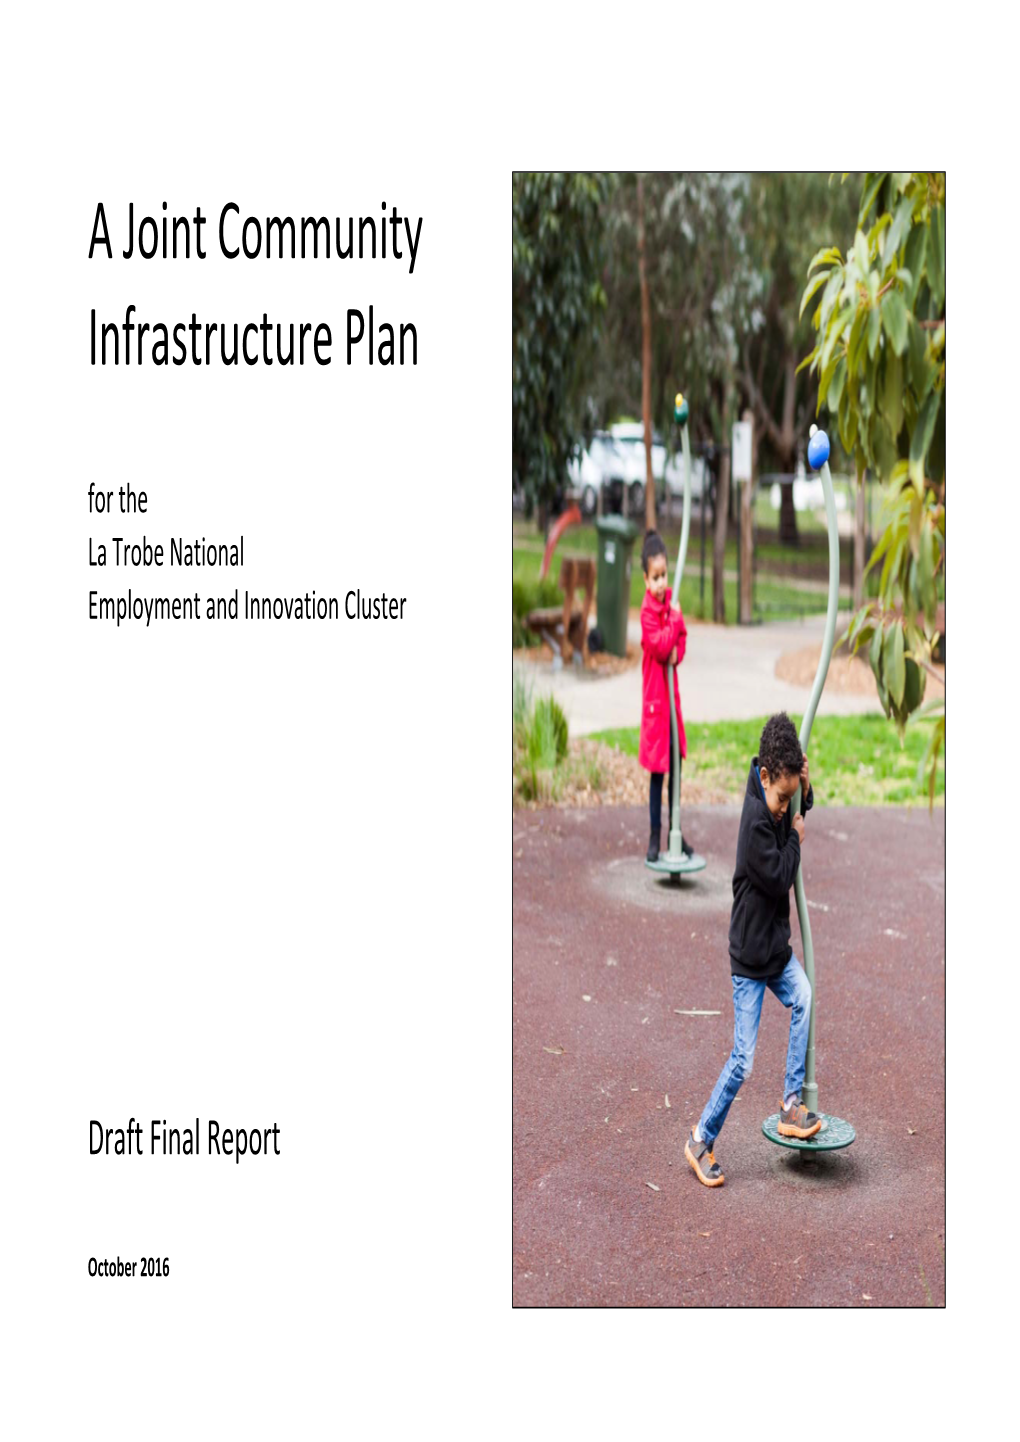 A Joint Community Infrastructure Plan for the La Trobe National Employment and Innovation Cluster